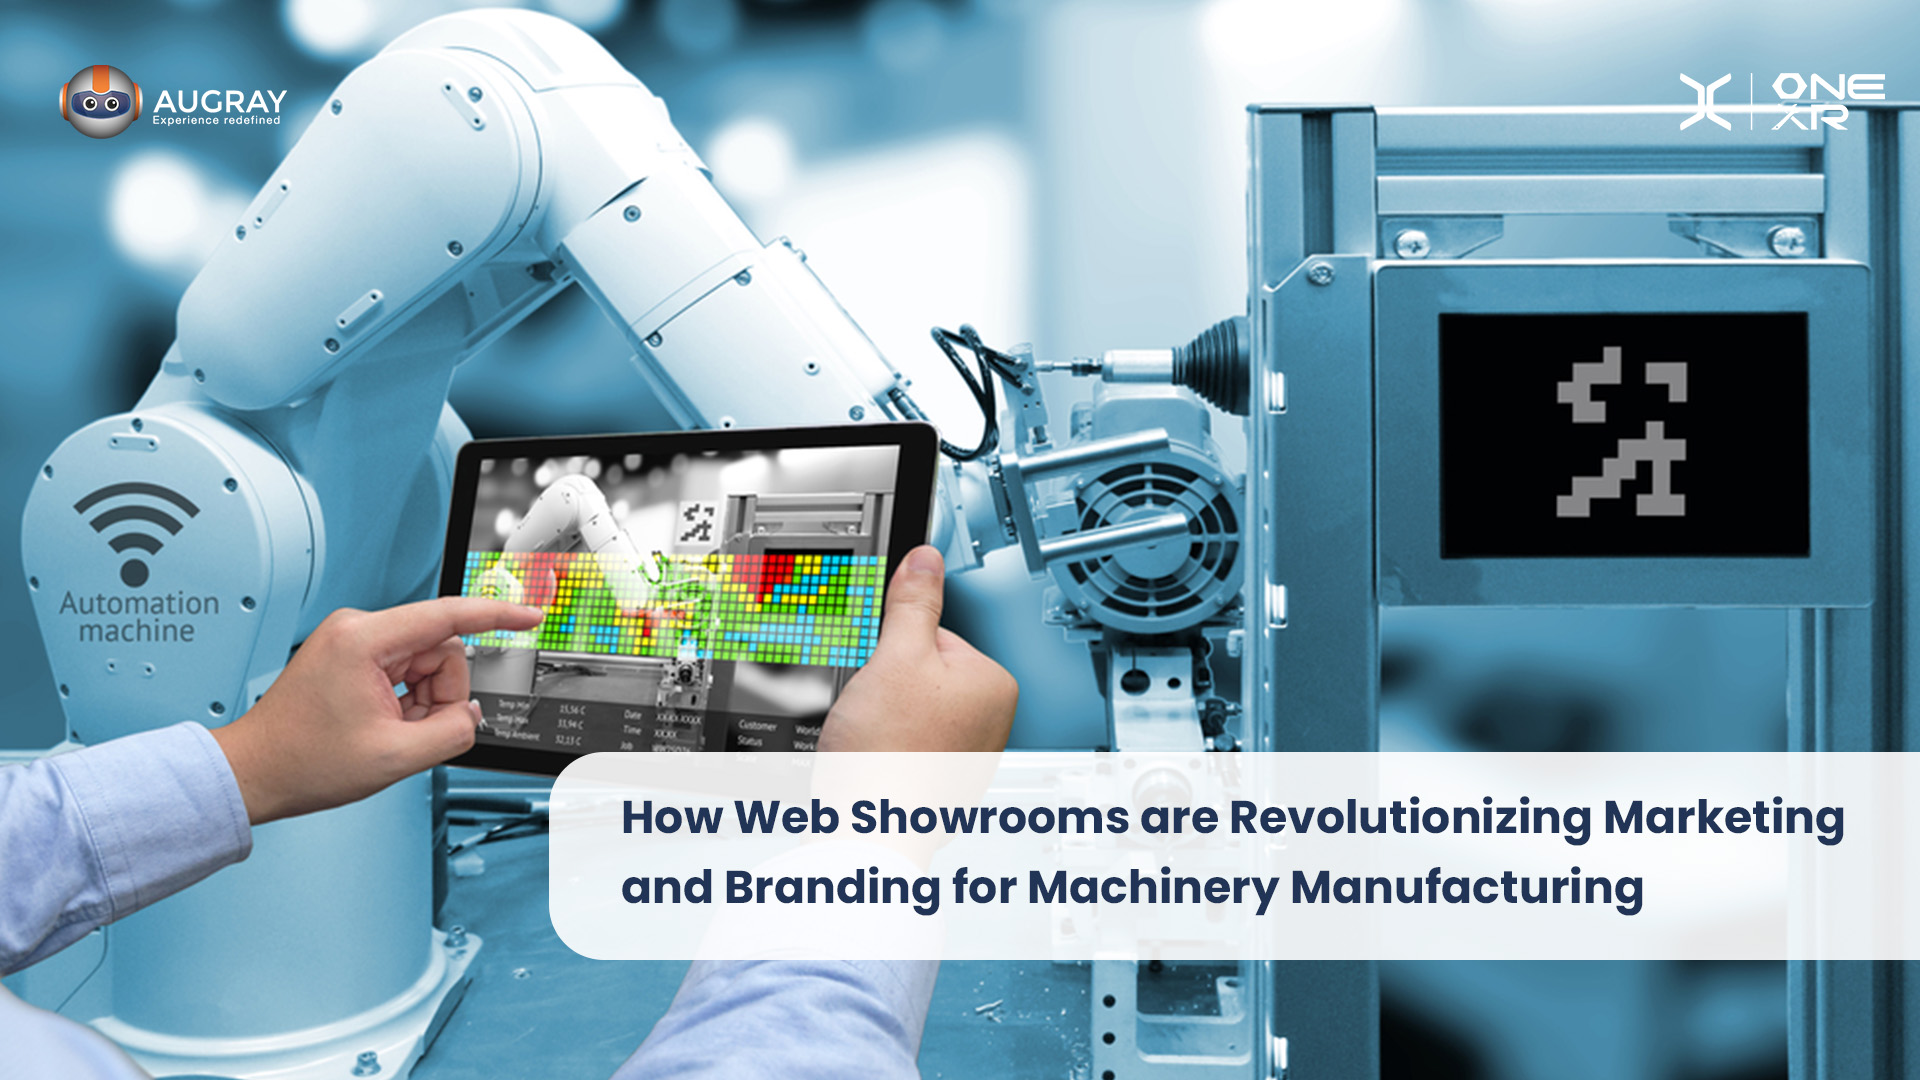 How Web Showrooms are Revolutionizing Marketing and Branding for Machinery Manufacturing - Augray Blog